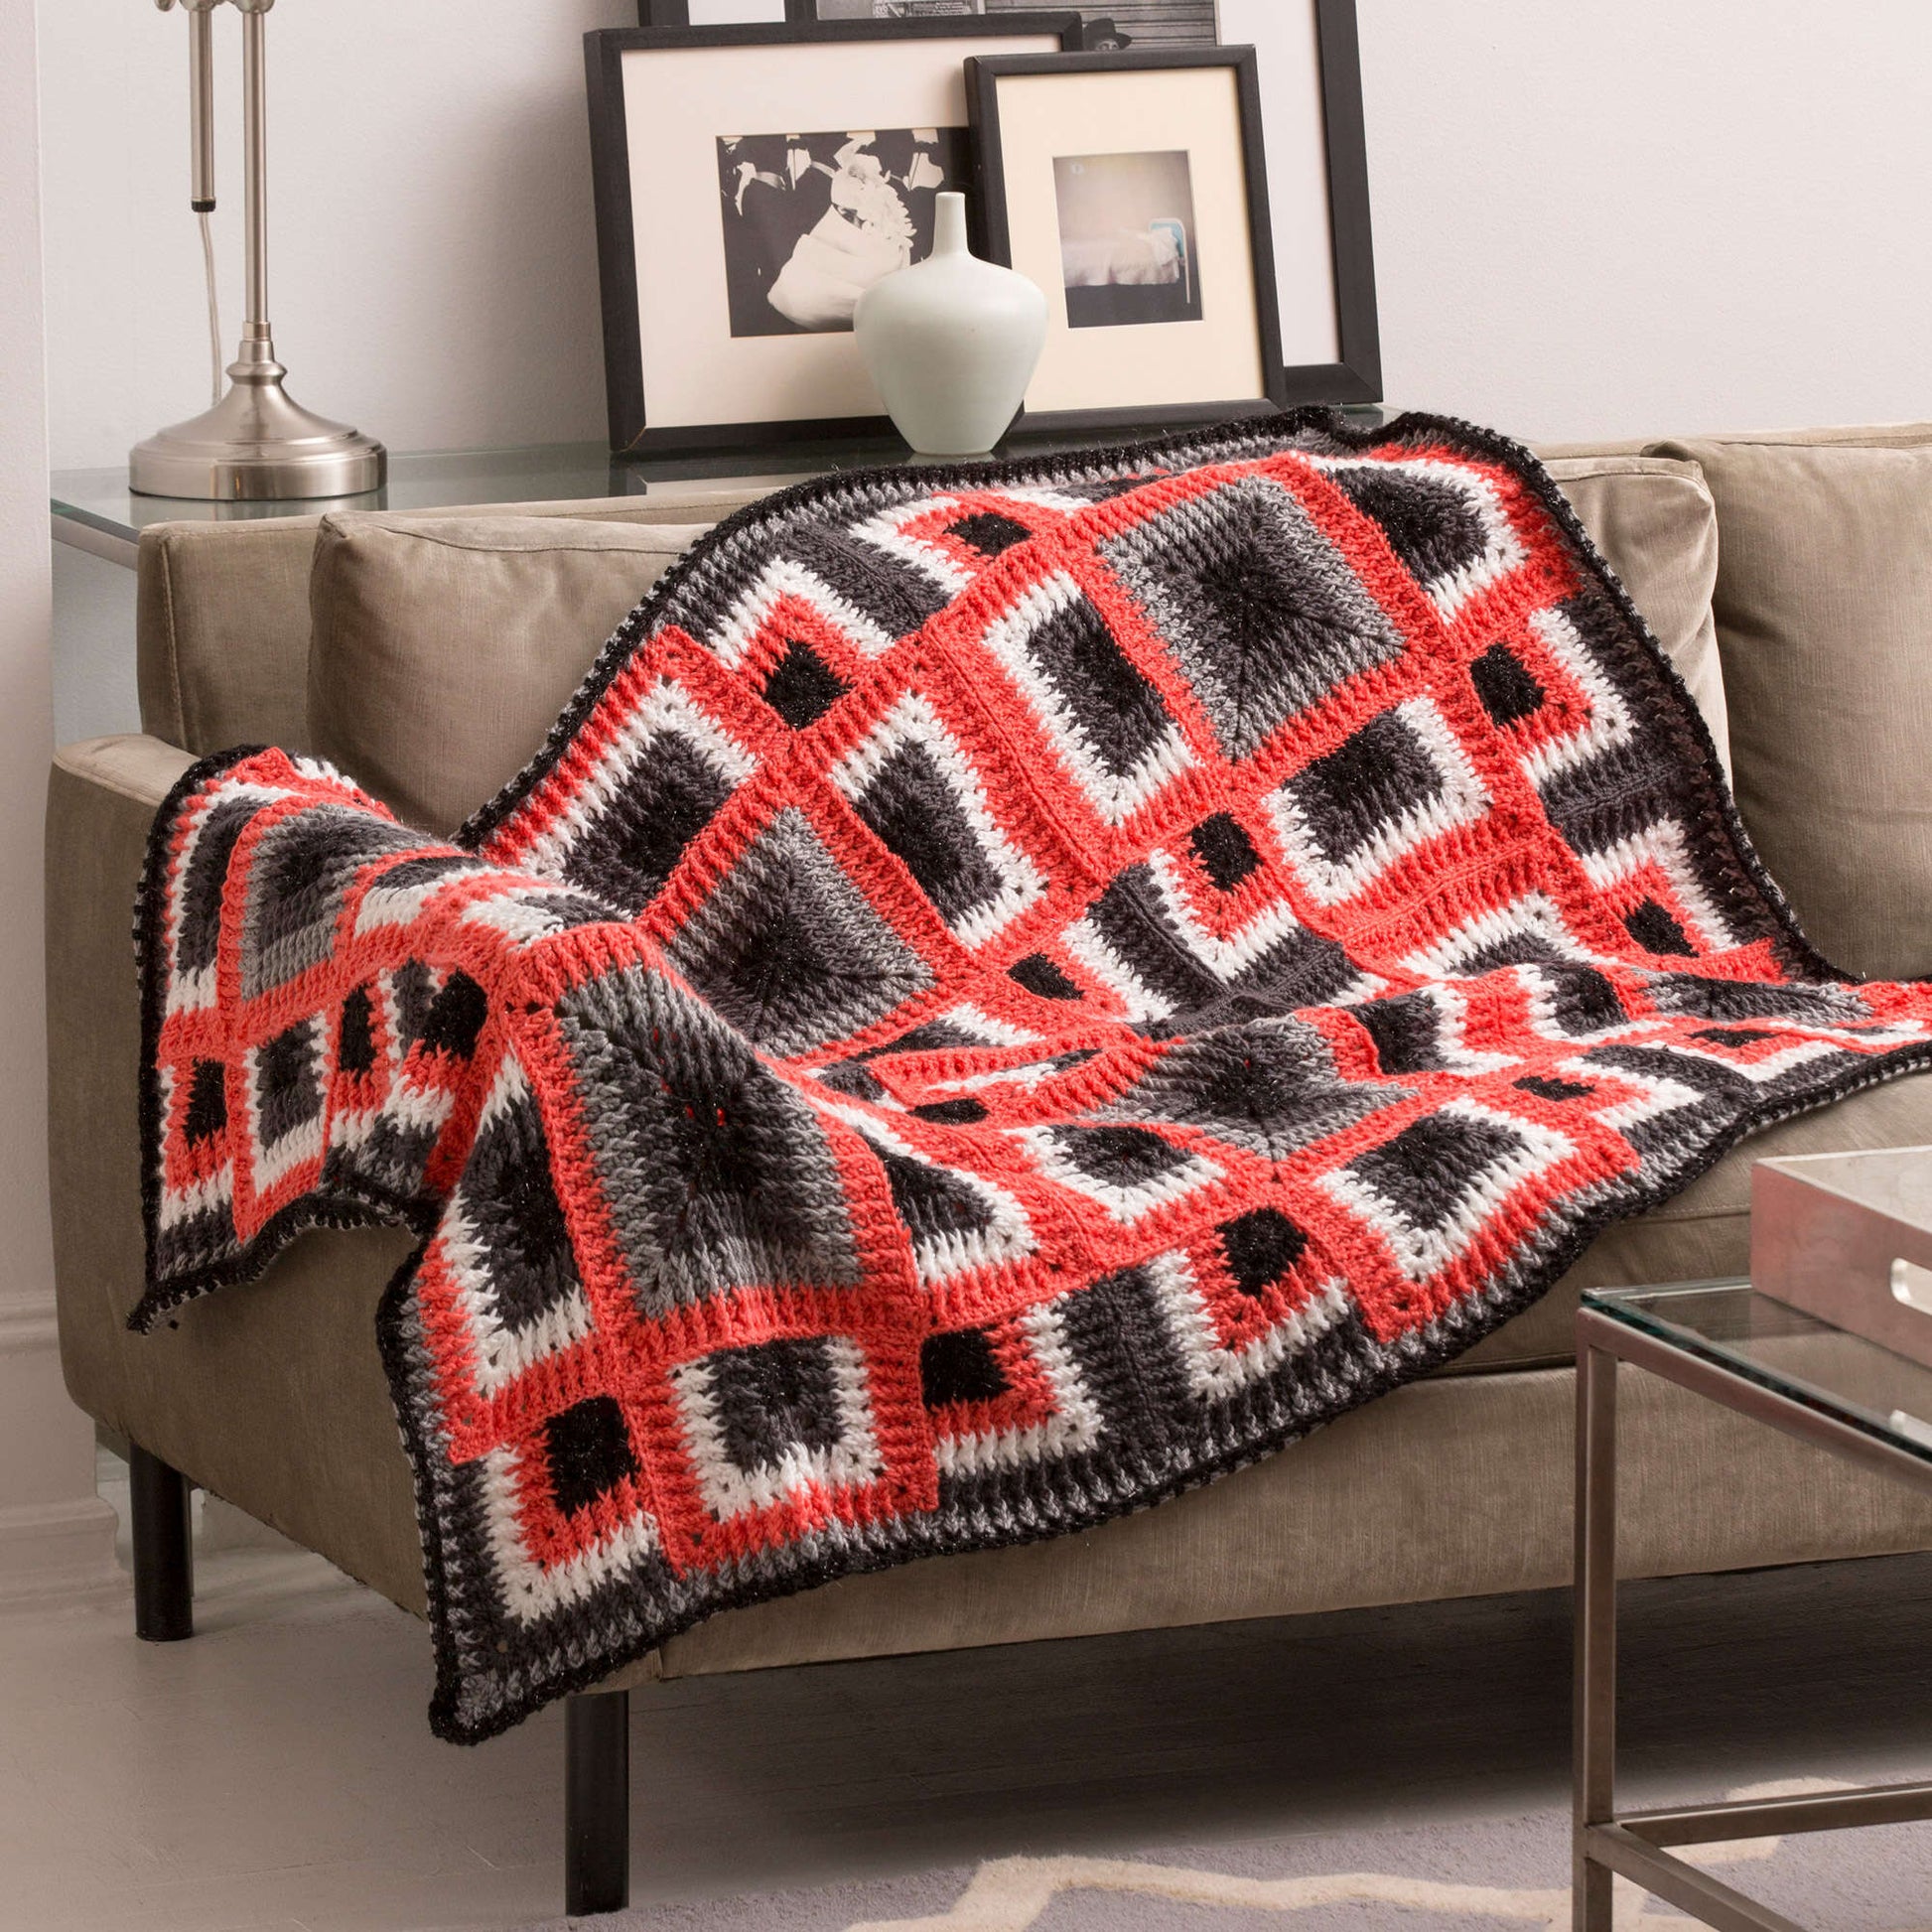 Free Red Heart Dynamic Squares Throw Crochet Pattern